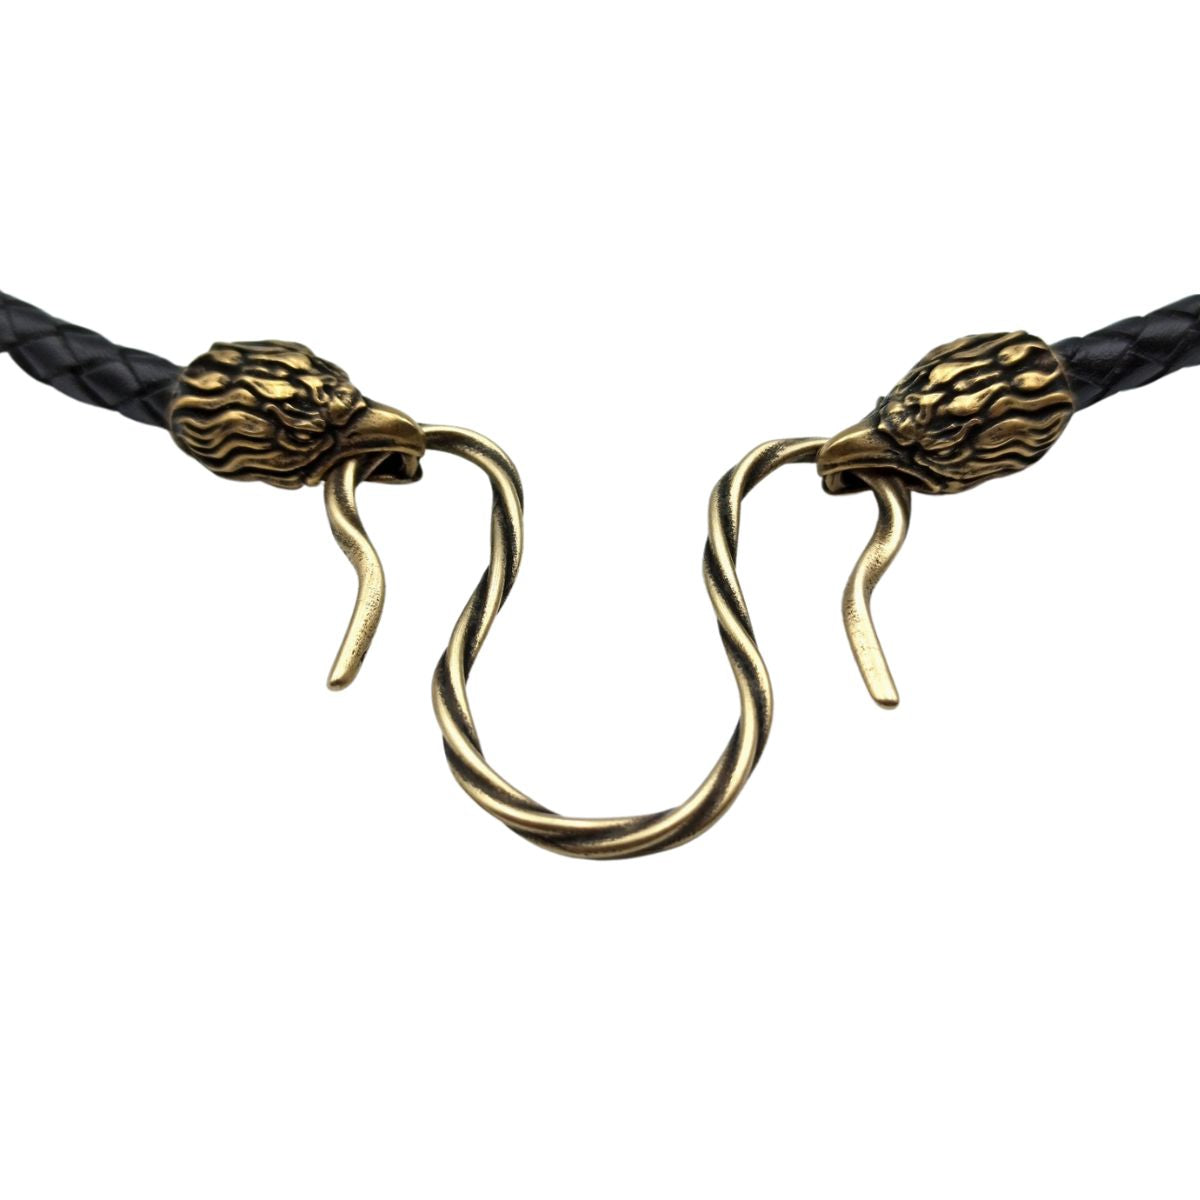 Eagle leather necklace with Bronze clasps